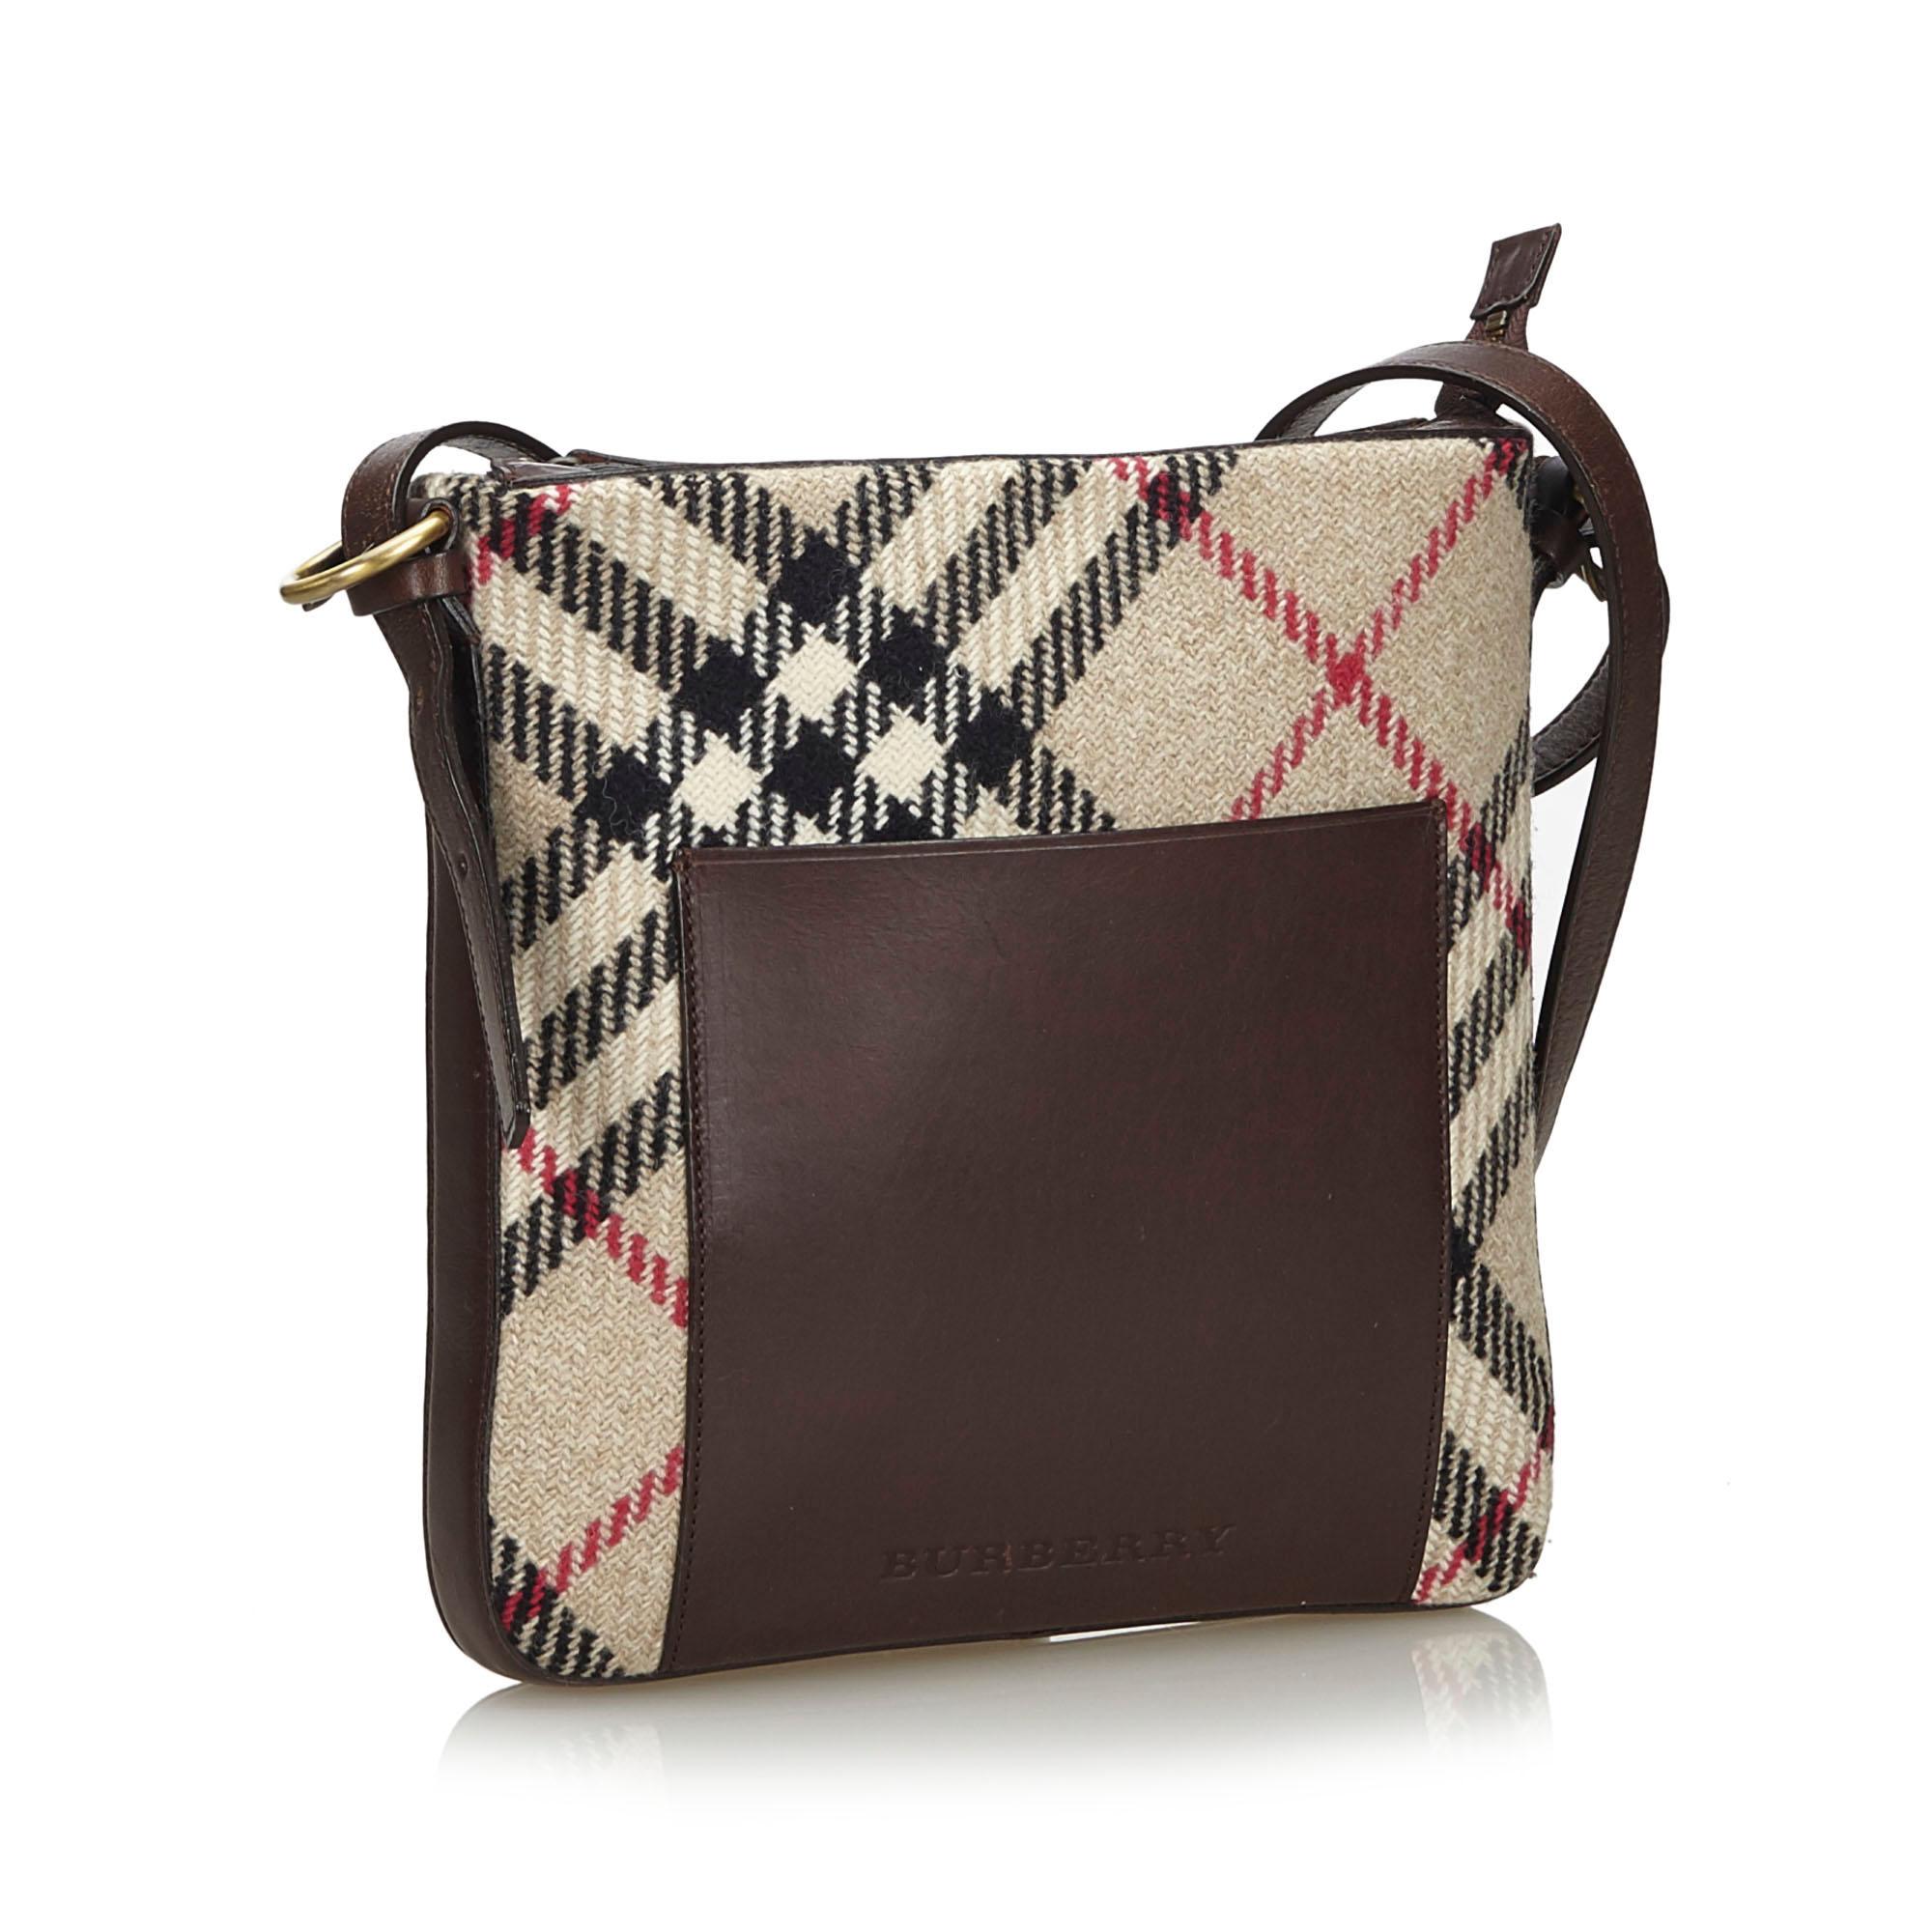 This crossbody bag features a plaid wool body with leather trim, a front exterior slip pocket, a flat leather strap, a top zip closure, and interior zip and slip pockets. It carries as AB condition rating.

Inclusions: 
This item does not come with